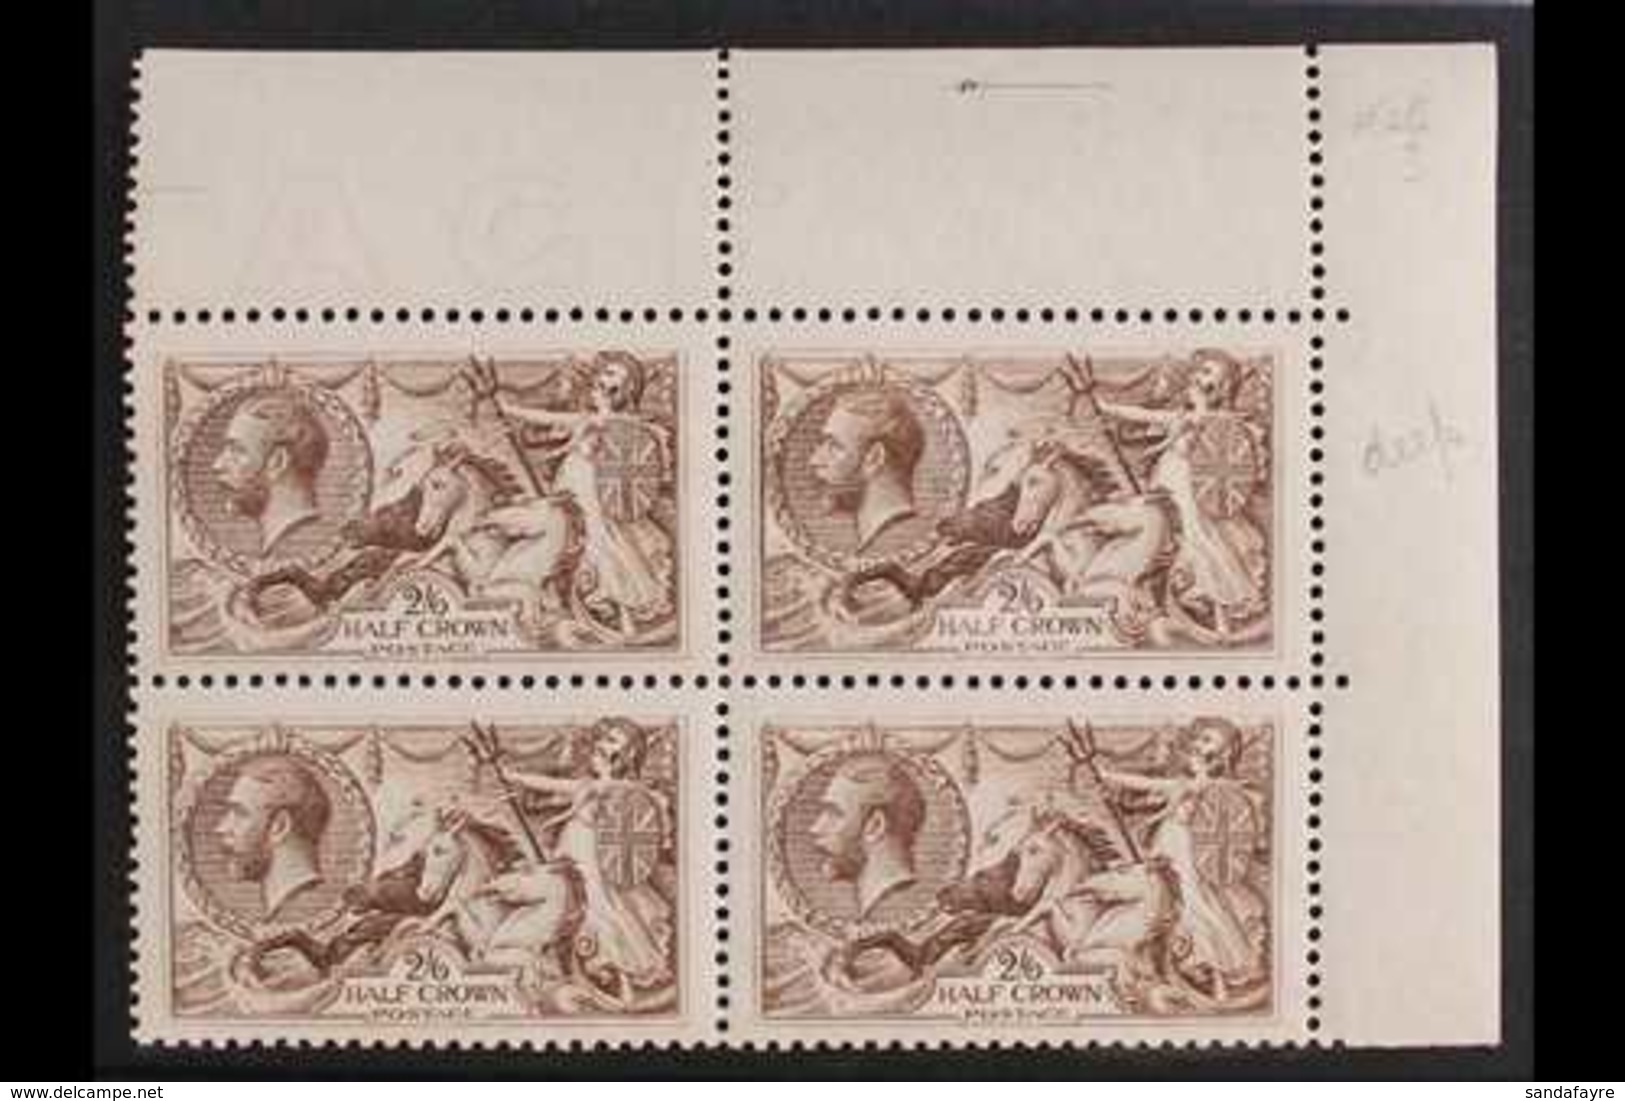 1918-19 2s6d Chocolate-brown Bradbury Seahorse, SG 414, Superb Never Hinged Mint BLOCK OF FOUR From The Upper-right Corn - Unclassified